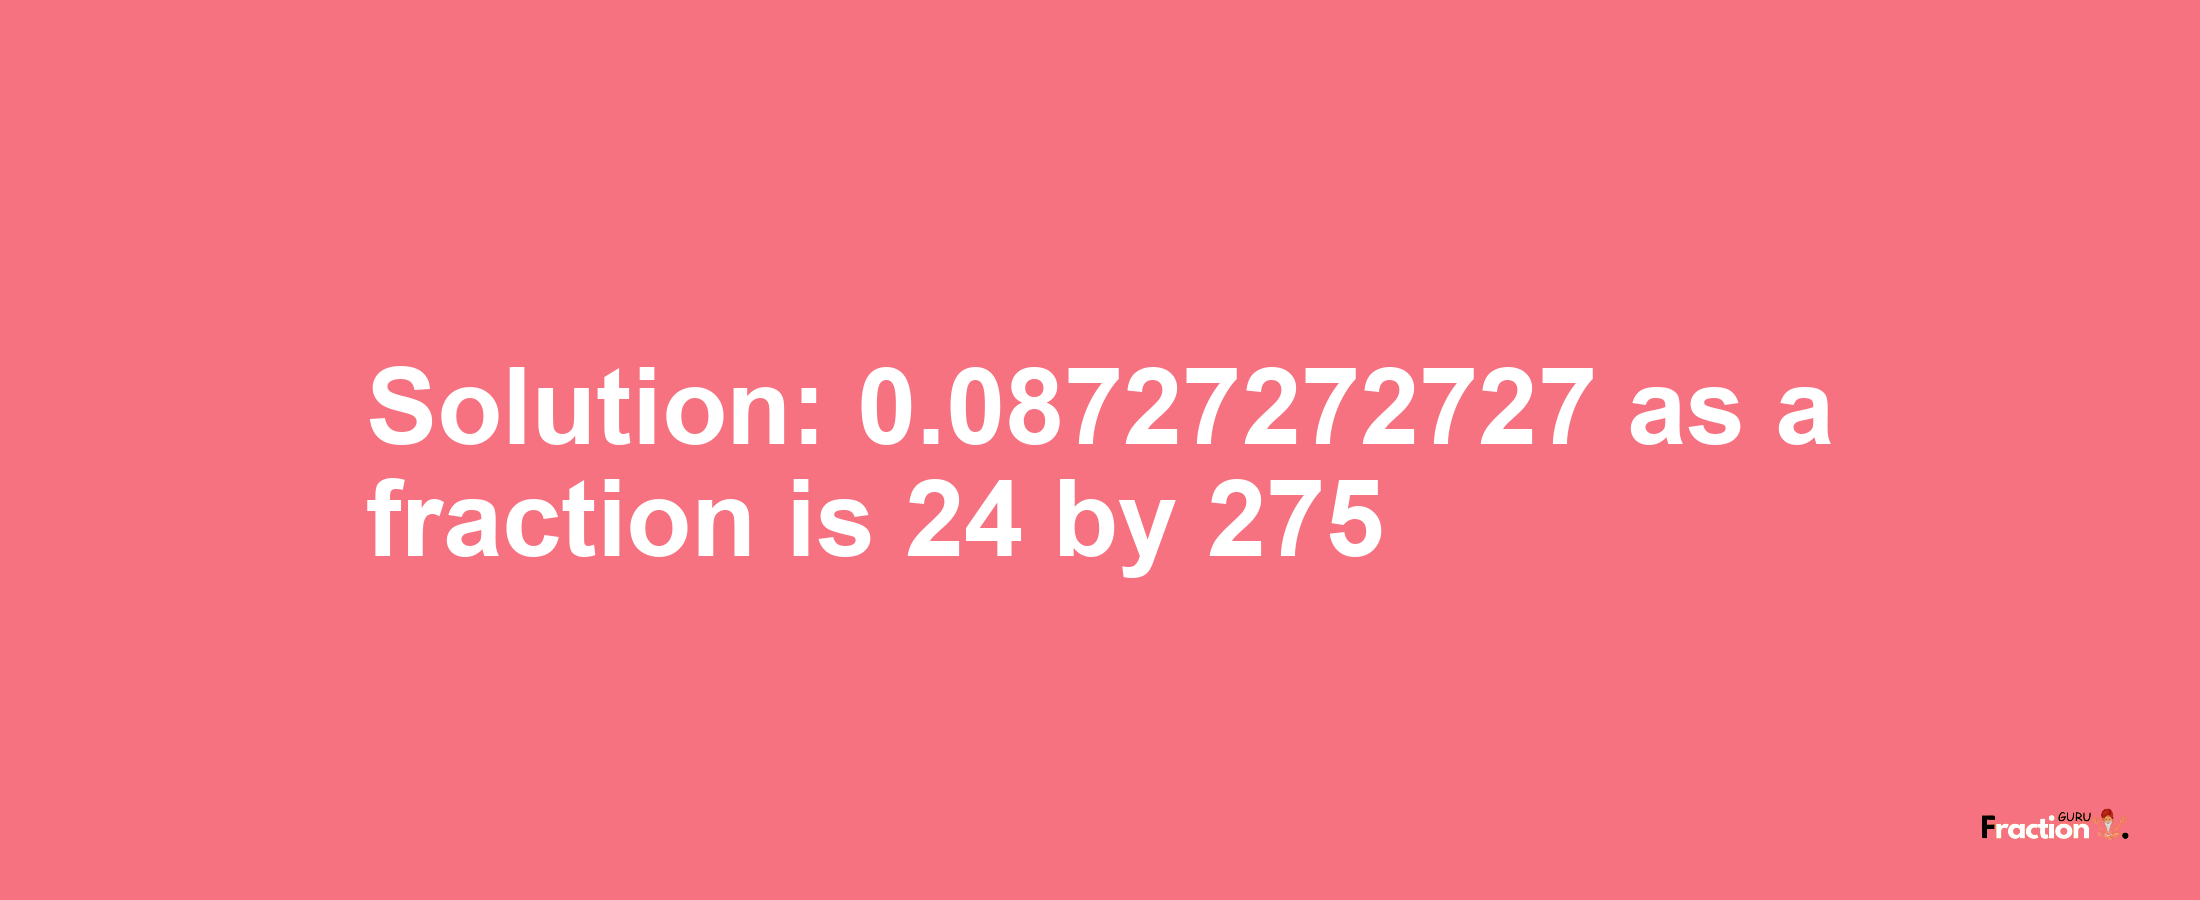 Solution:0.08727272727 as a fraction is 24/275